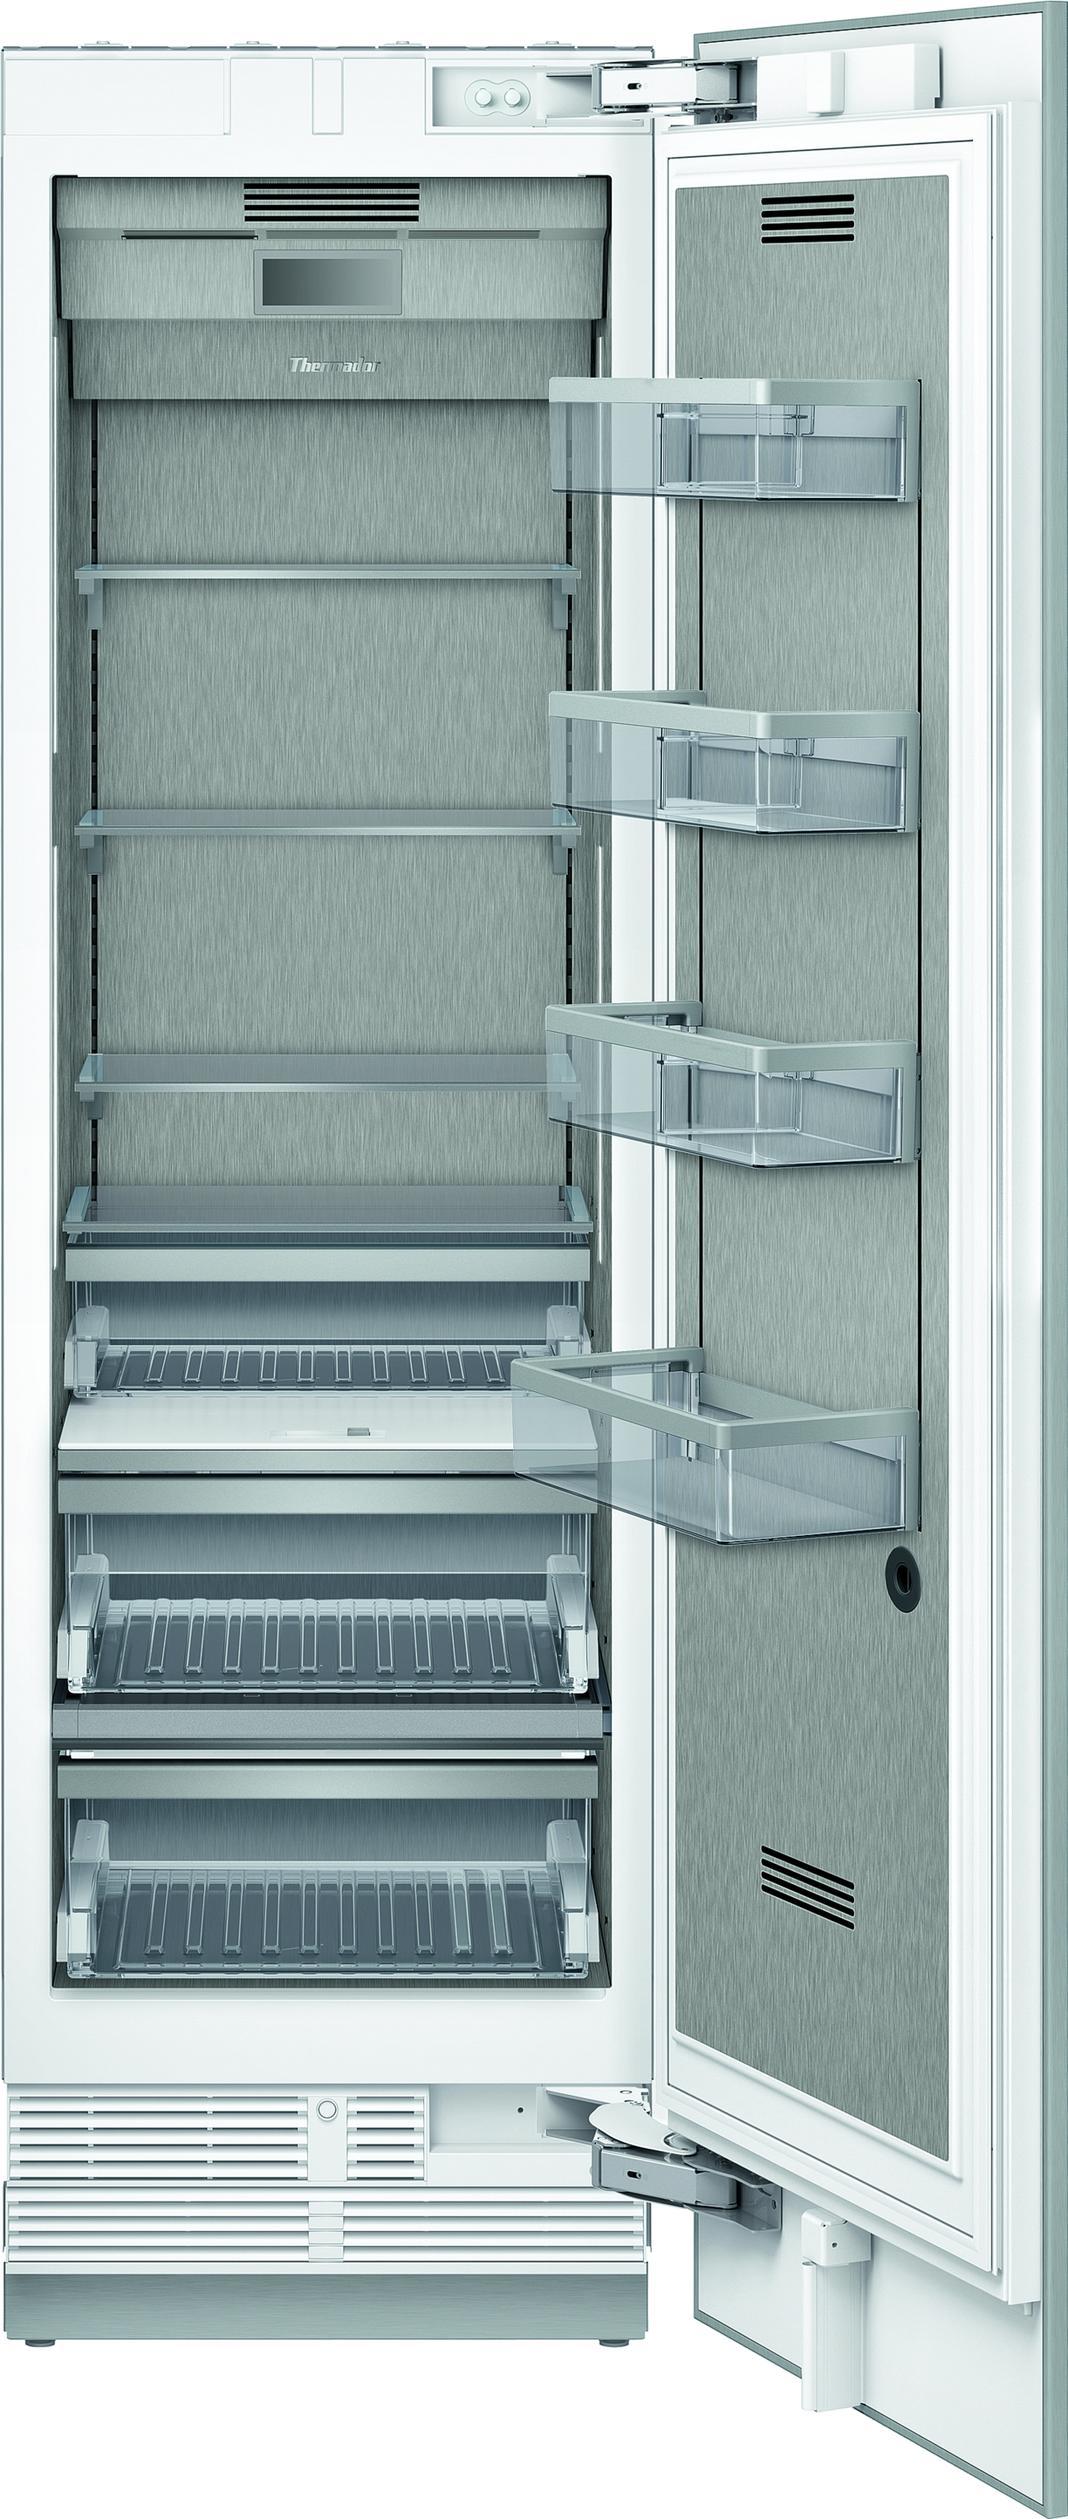 Thermador - 23.75 Inch 13 cu. ft Built In / Integrated All Fridge Refrigerator in Panel Ready - T24IR905SP